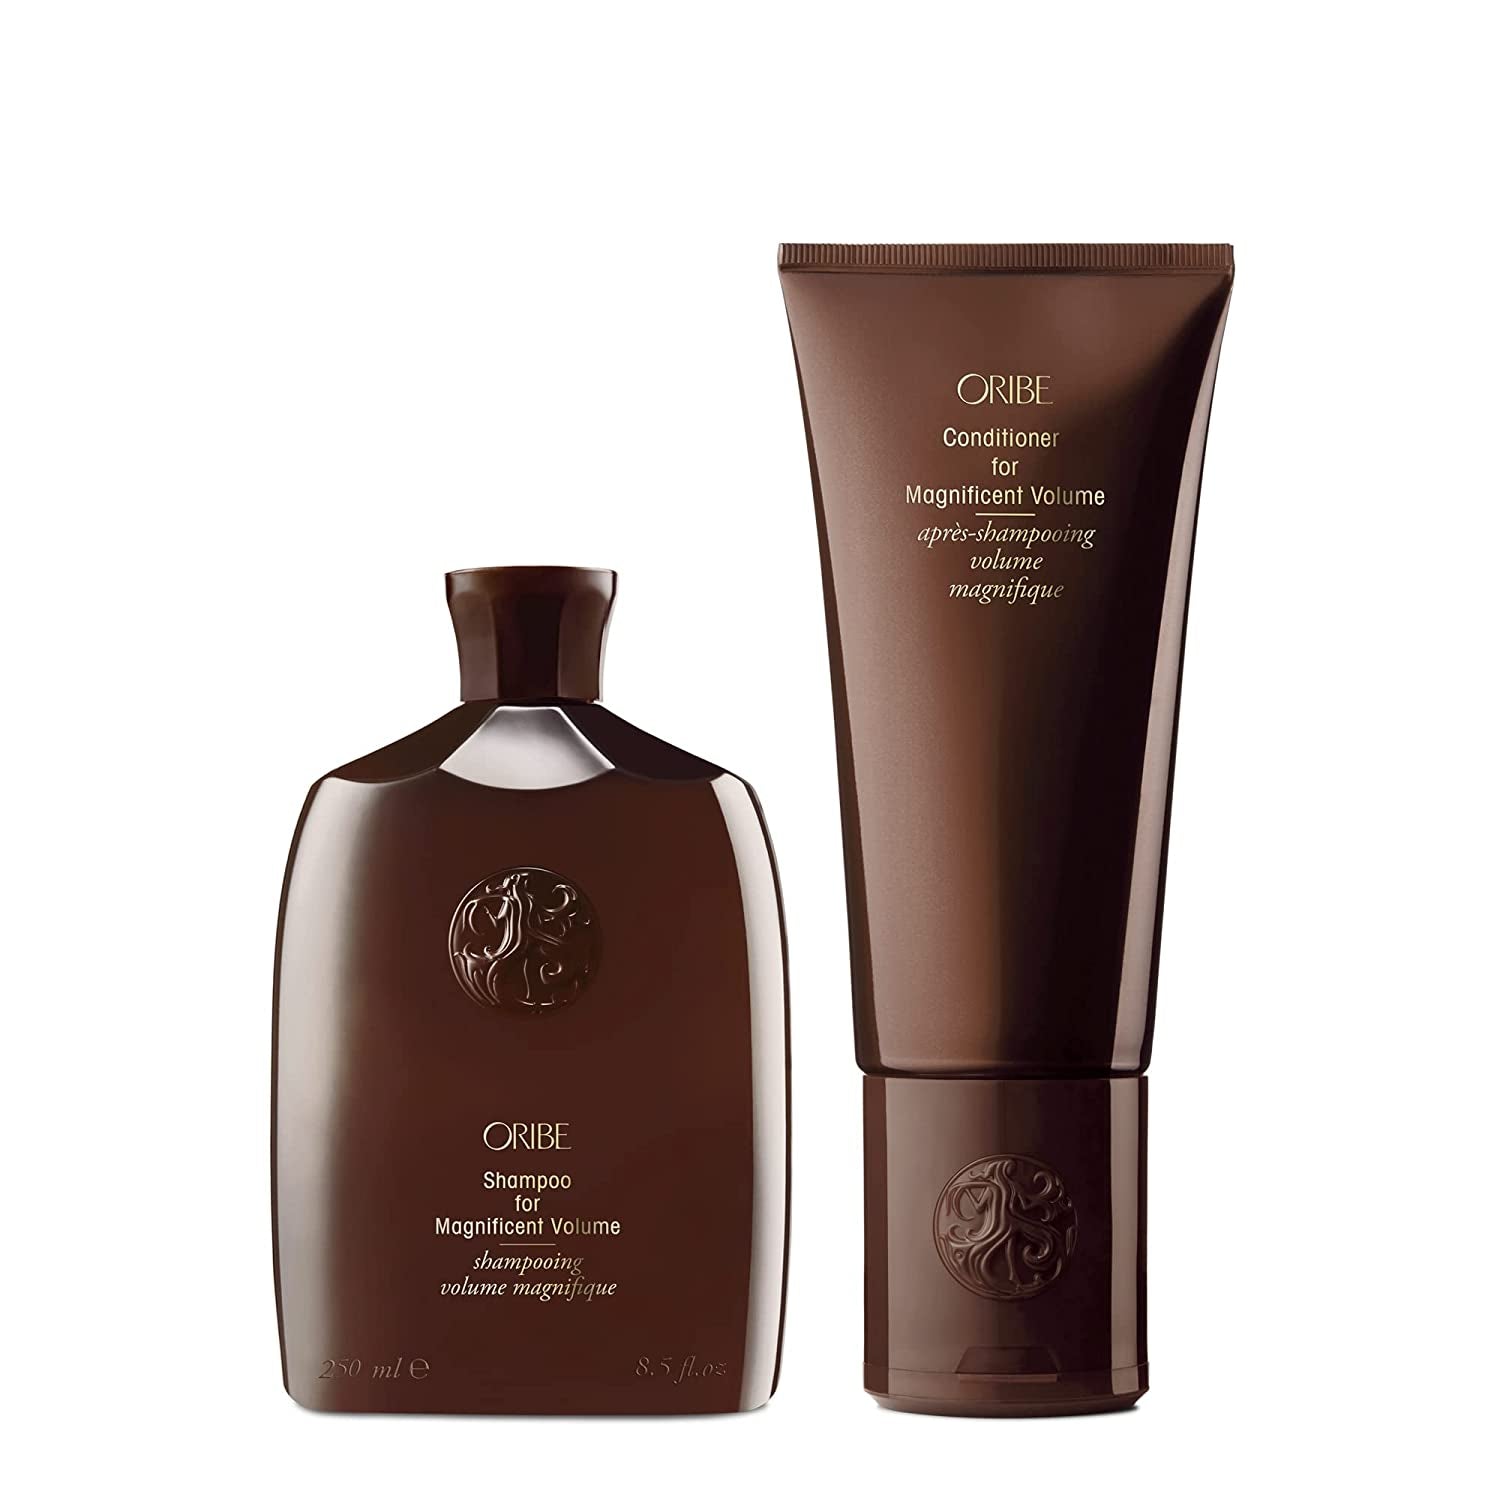 ORIBE Shampoo and Conditioner for Magnificent Volume Bundle